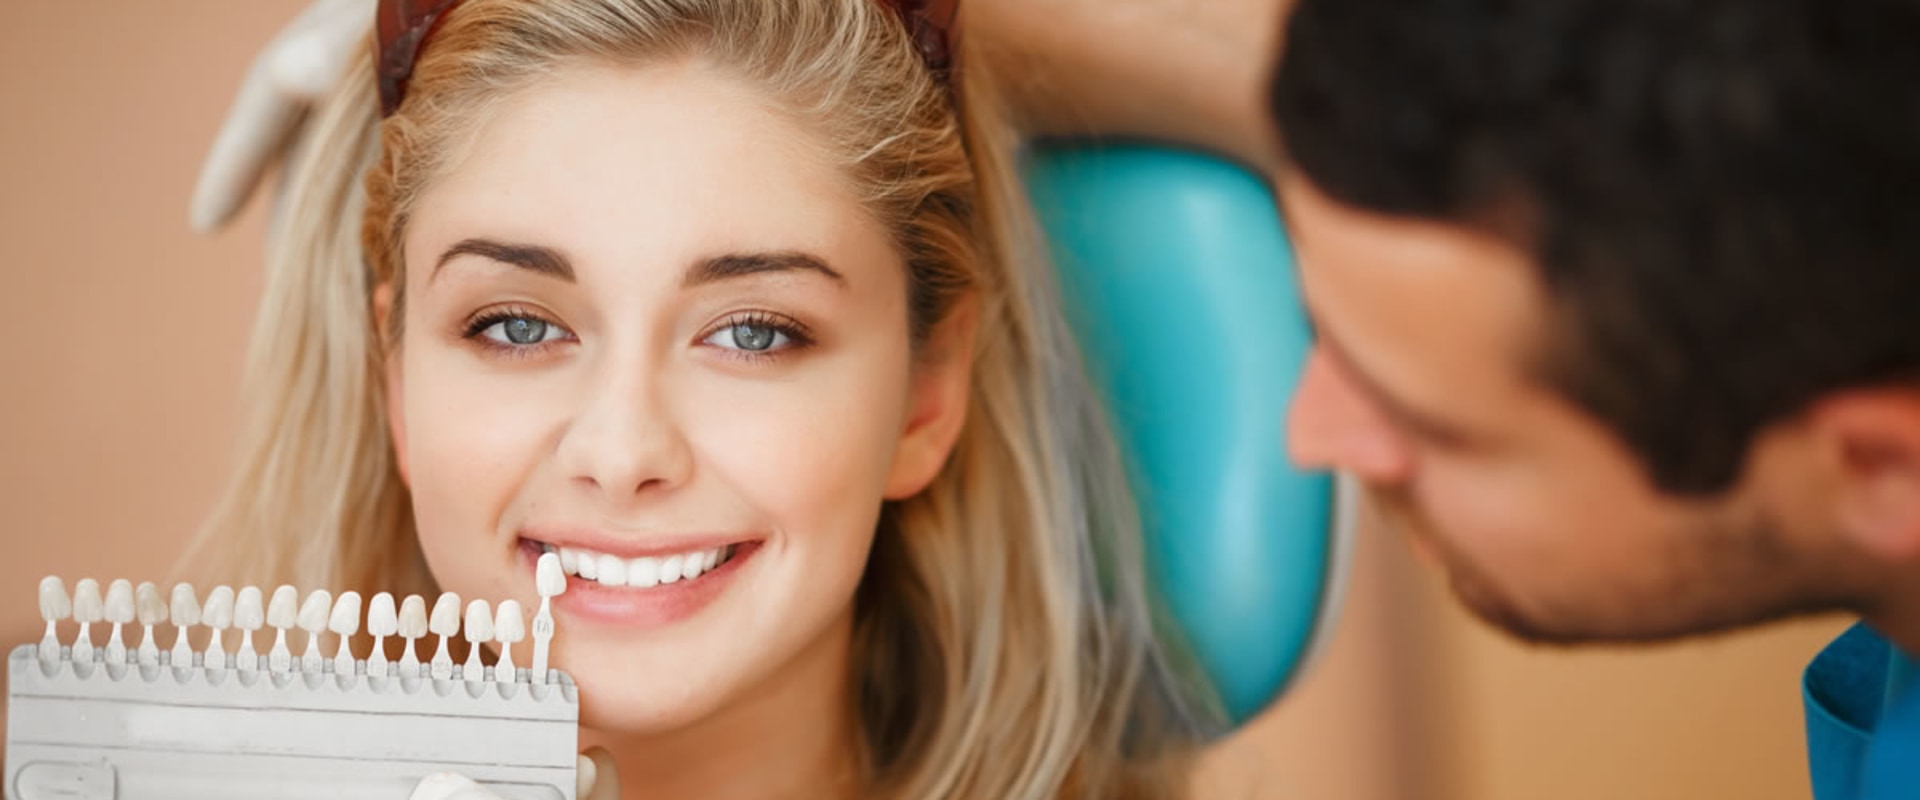 Everything You Need to Know About Whitening Toothpaste